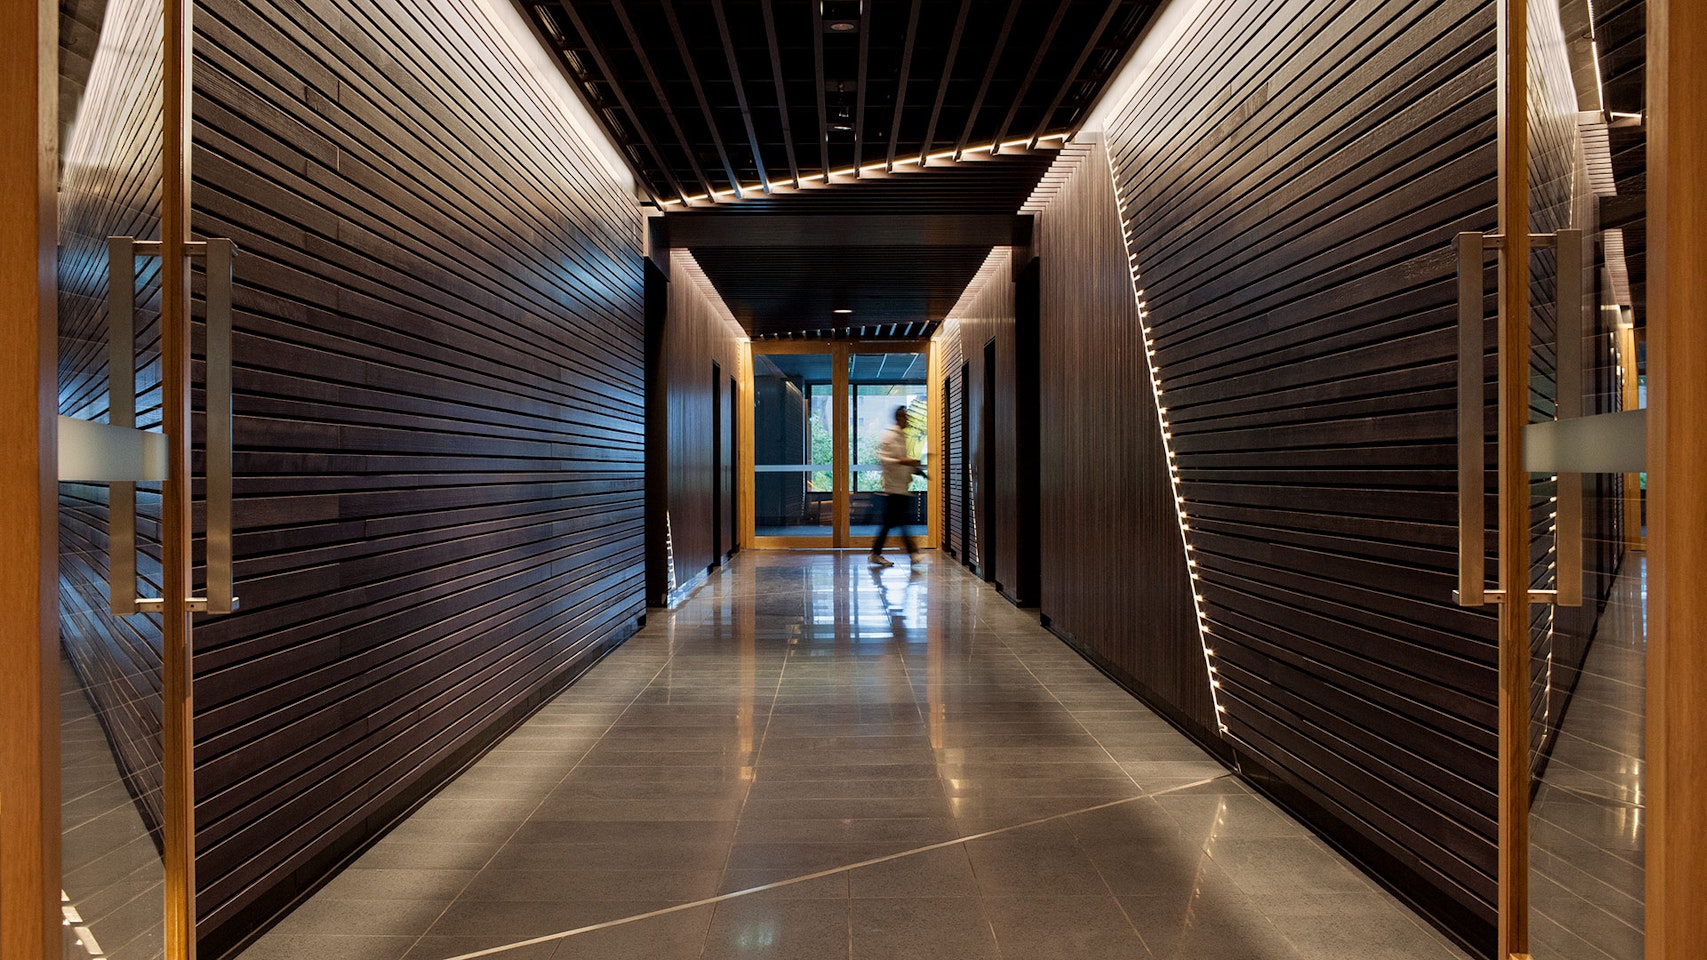 Aris LED linear floodlight in application, installed in 530 Collins Street Lobby. Architectural LED lighting